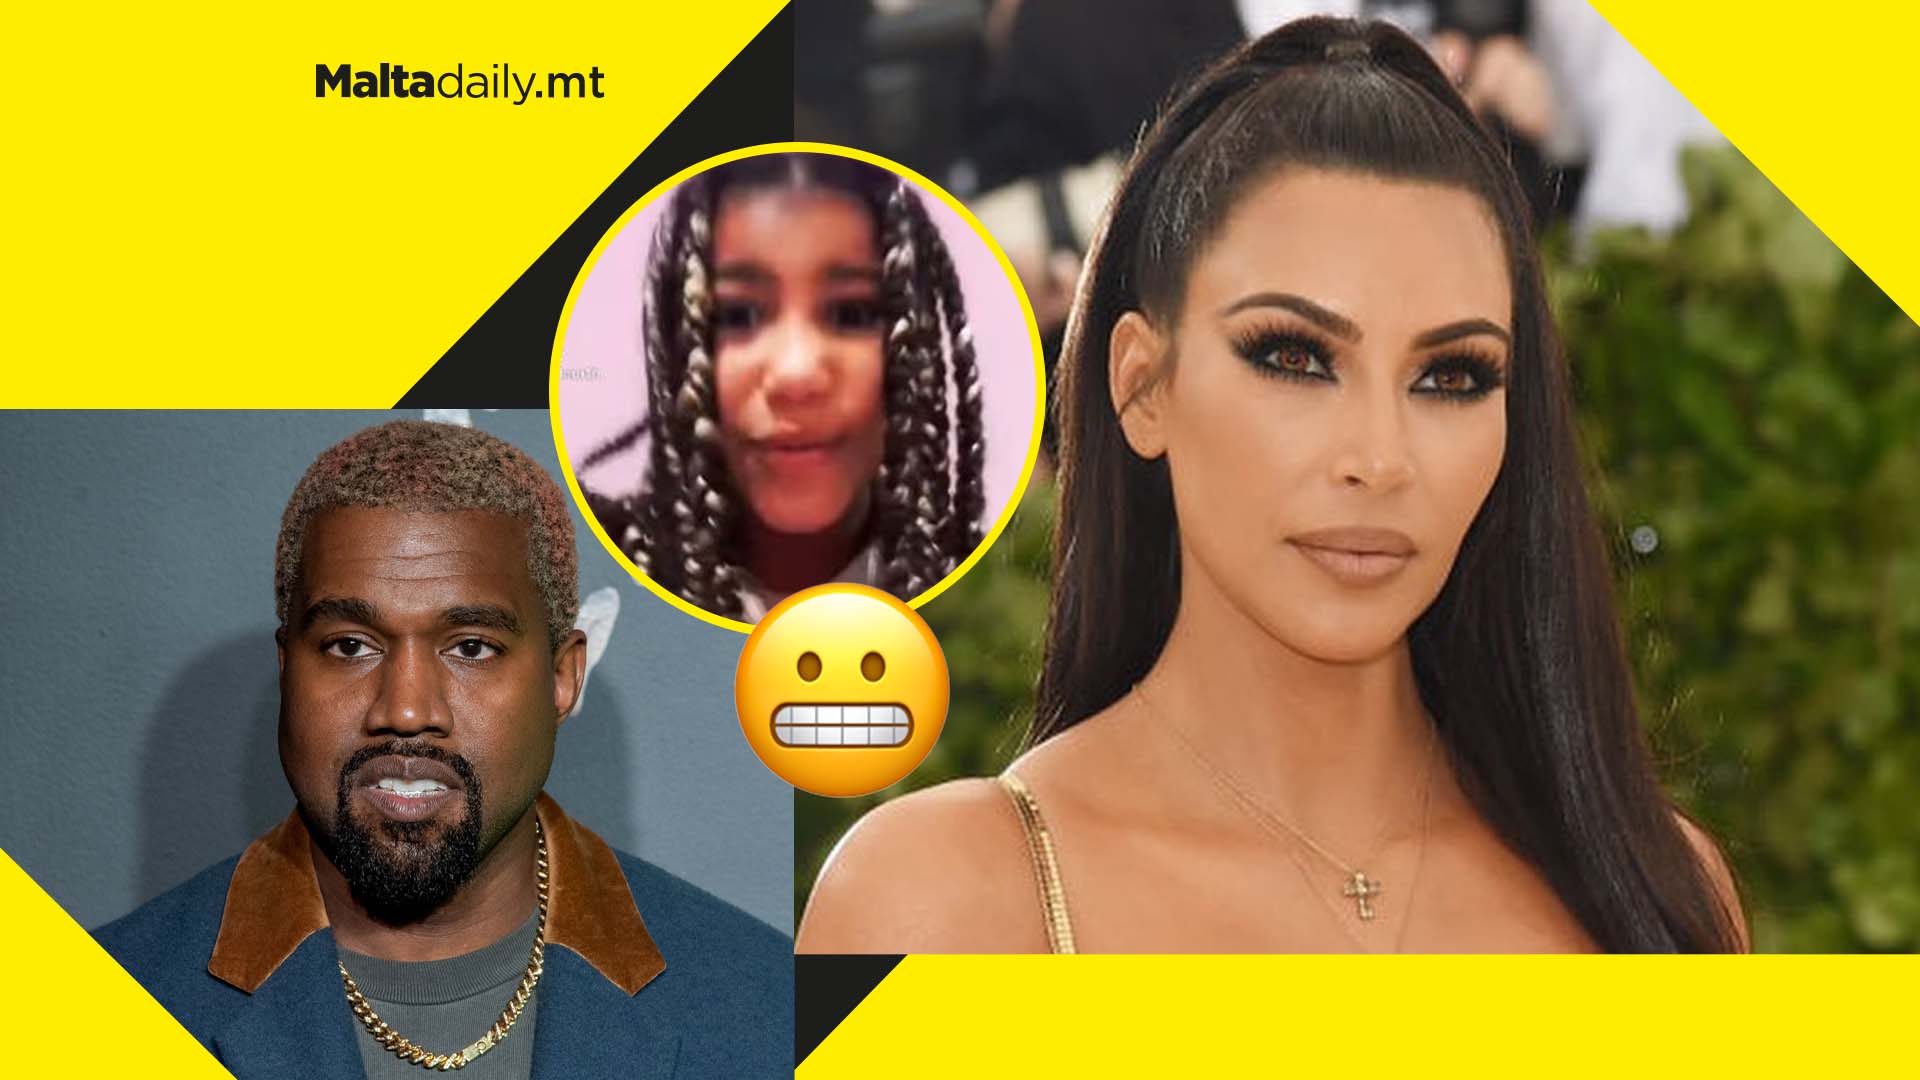 Kanye West accuses Kim Kardashian of "kidnapping" daughter amid divorce controversy